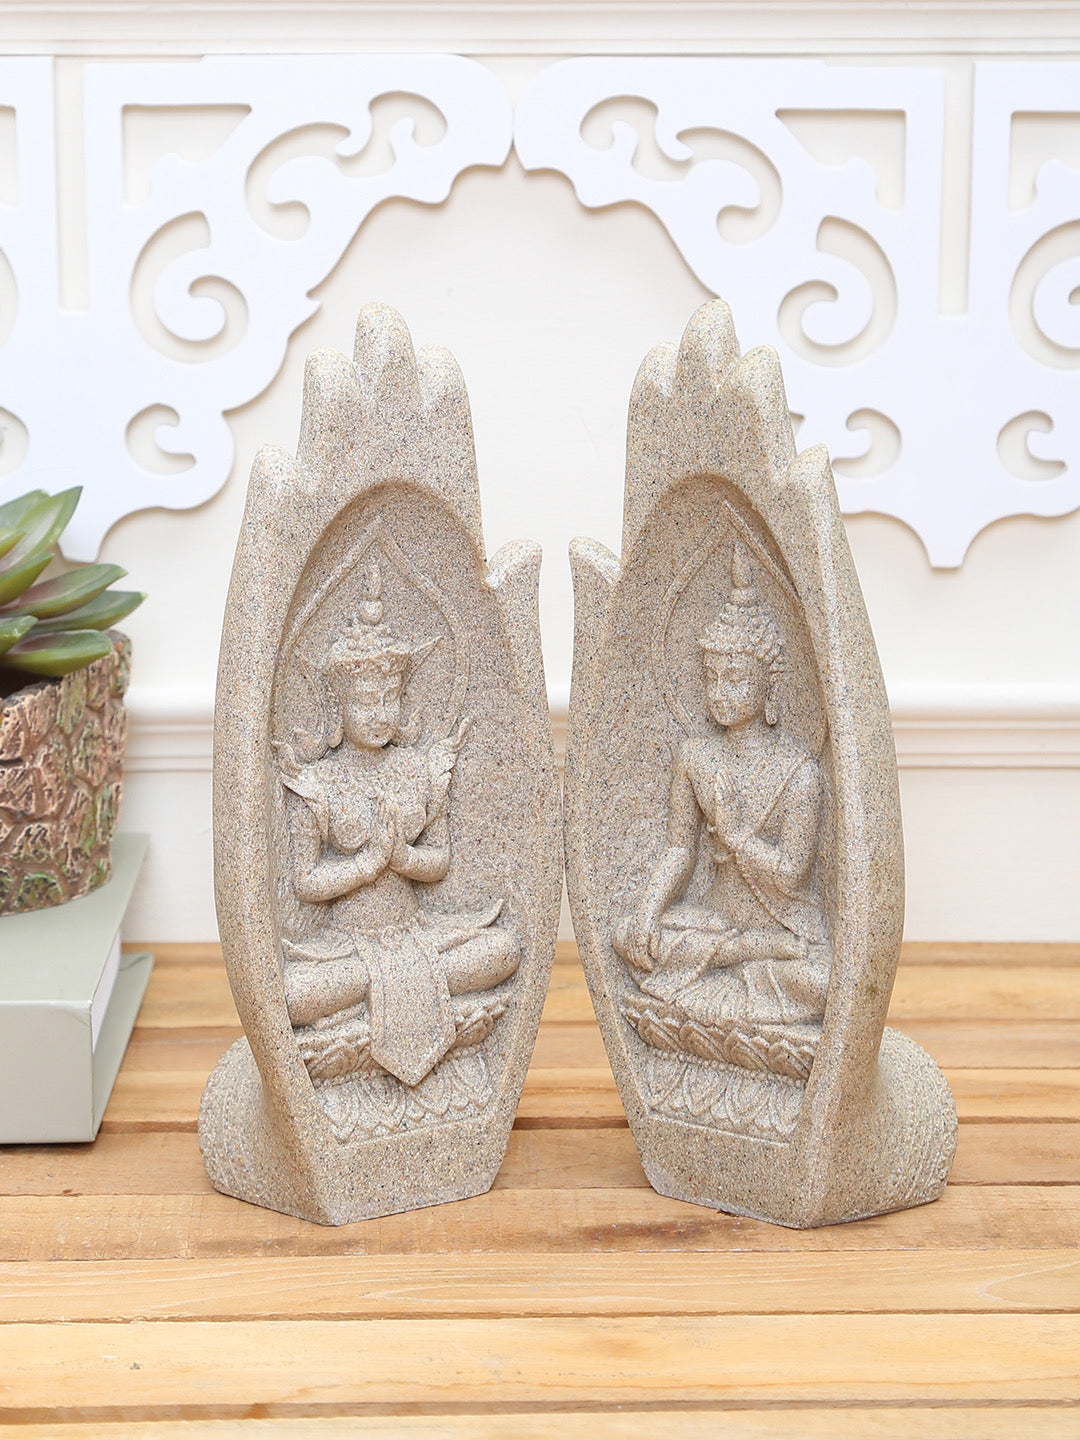 Intricately Designed Buddha Pair Statues - Default Title (REF19665)